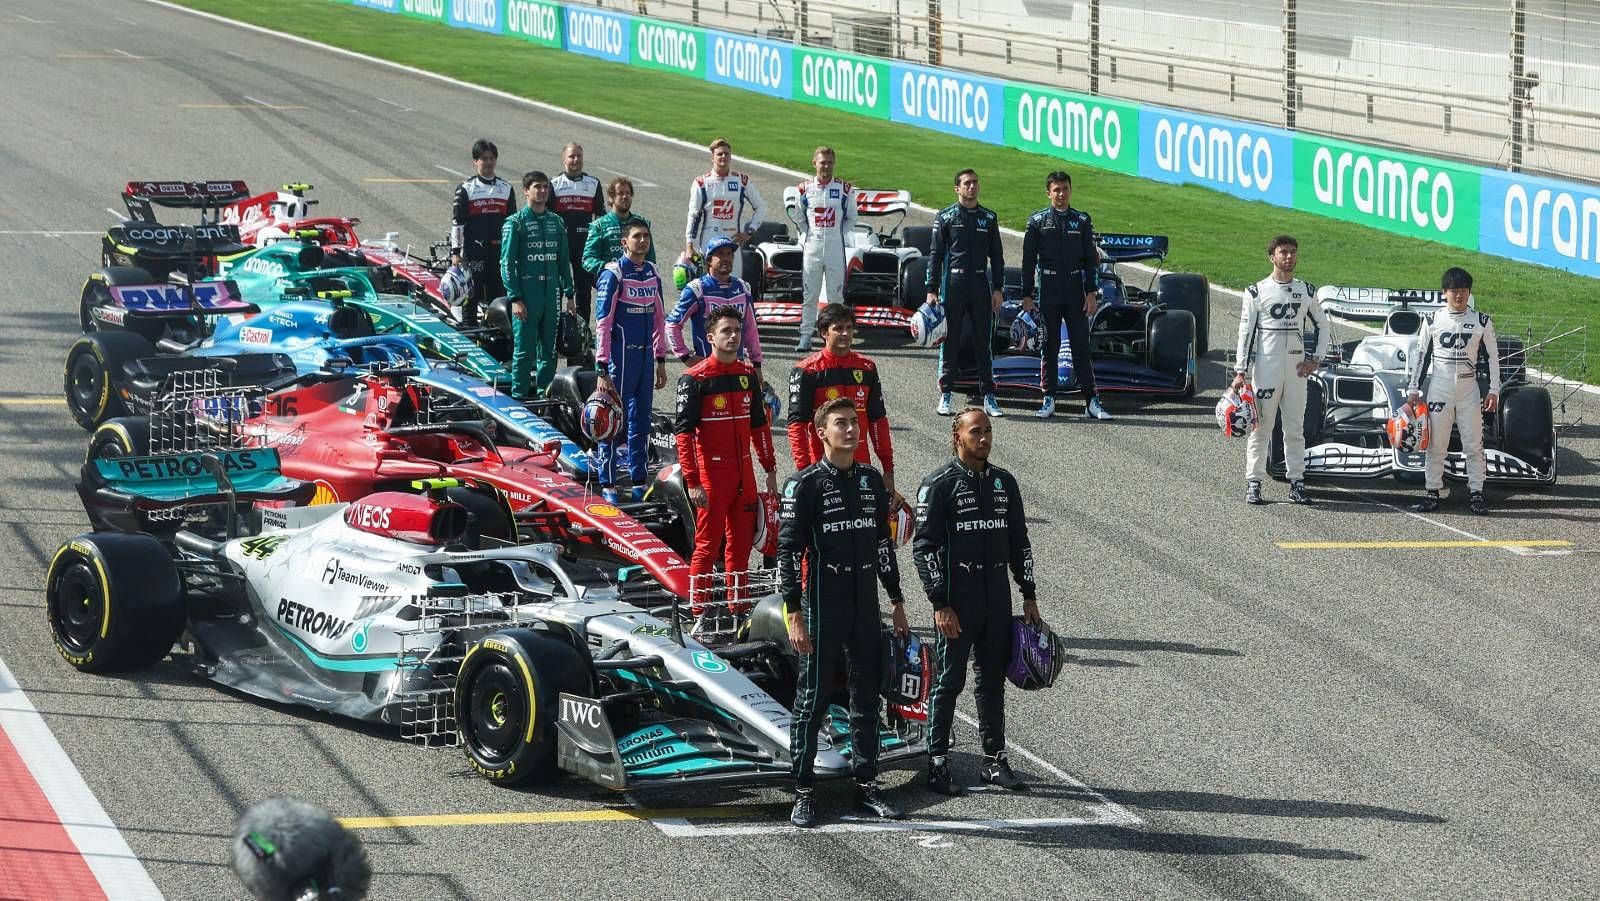 The 2023 F1 grid will feature 10 teams